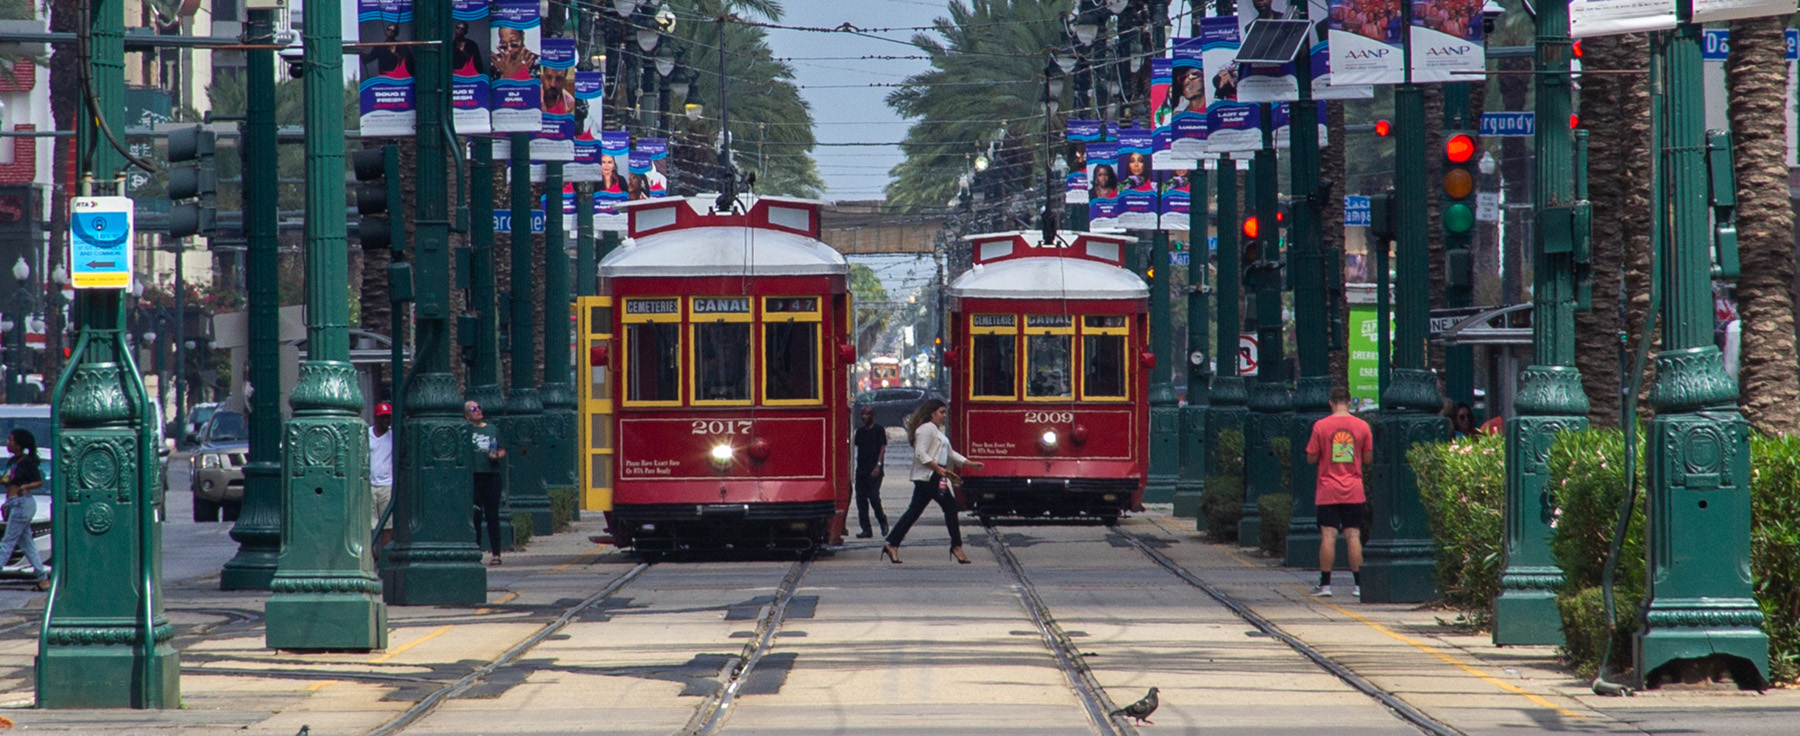 New Orleans streetcars just outside of the towntown area.